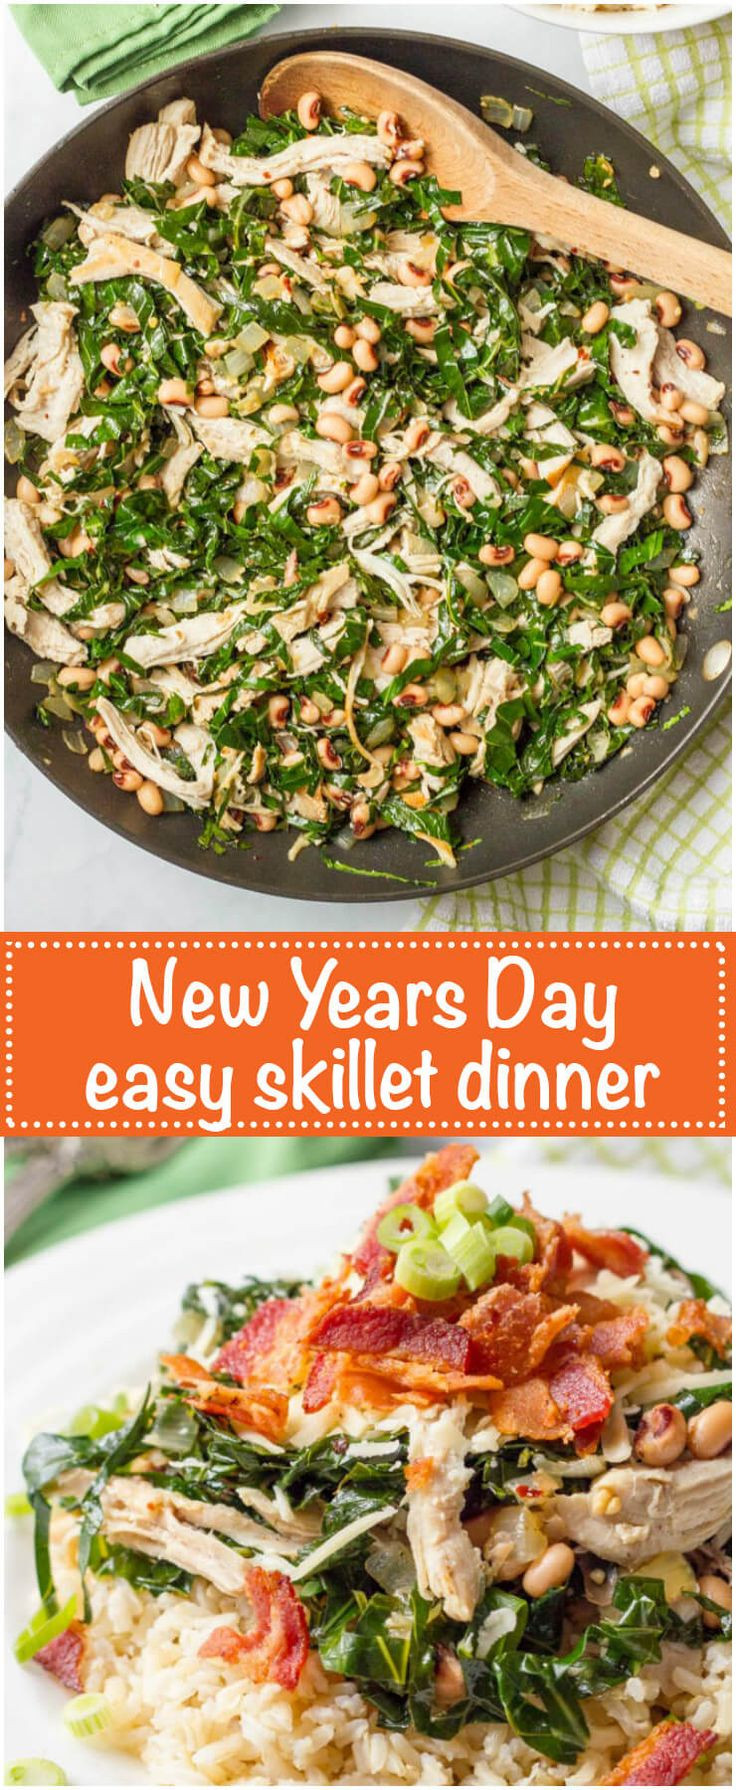 New Years Dinner Traditional
 Southern New Year s Day dinner skillet